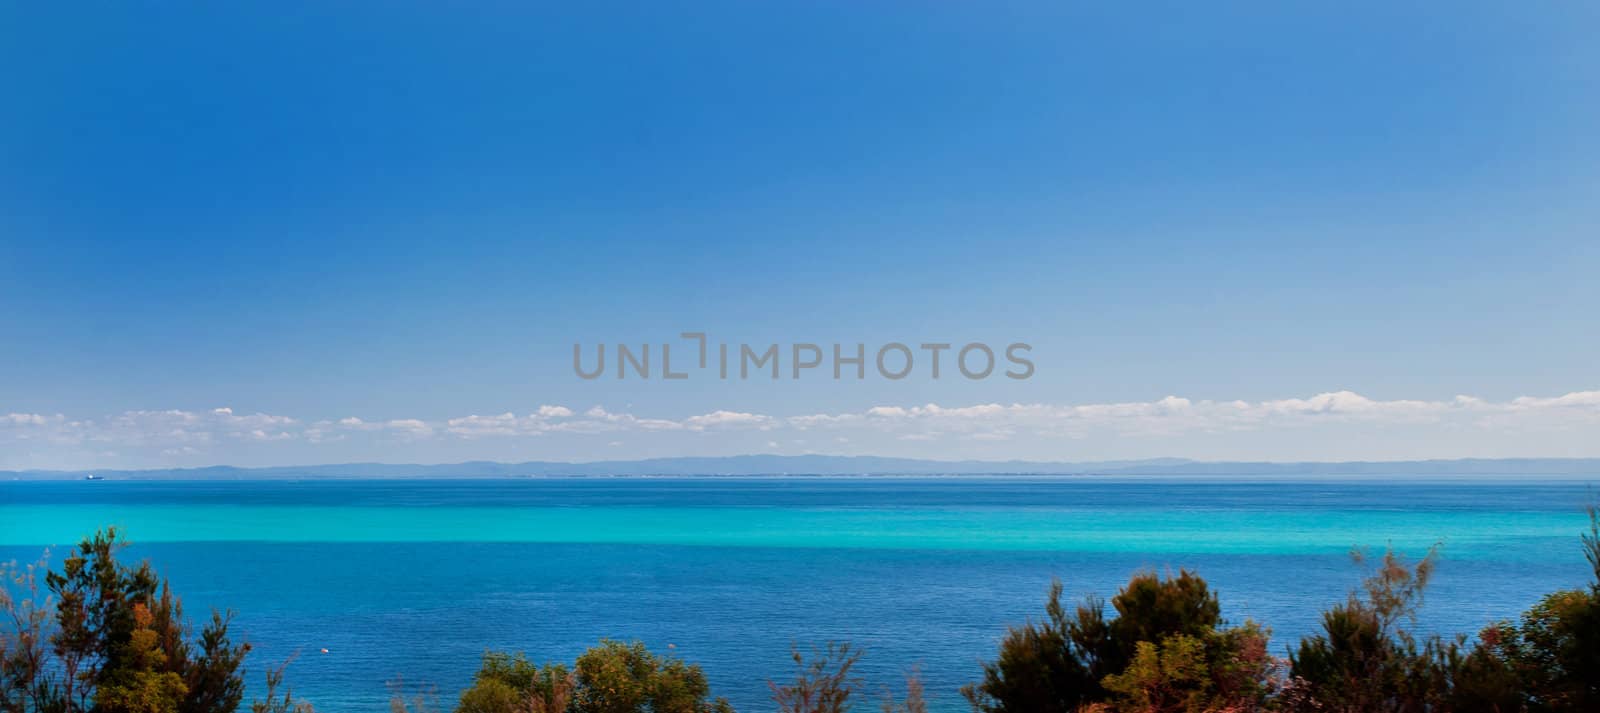 Wide crystal blue serene seascape under a clear blue sky with trees in the foreground